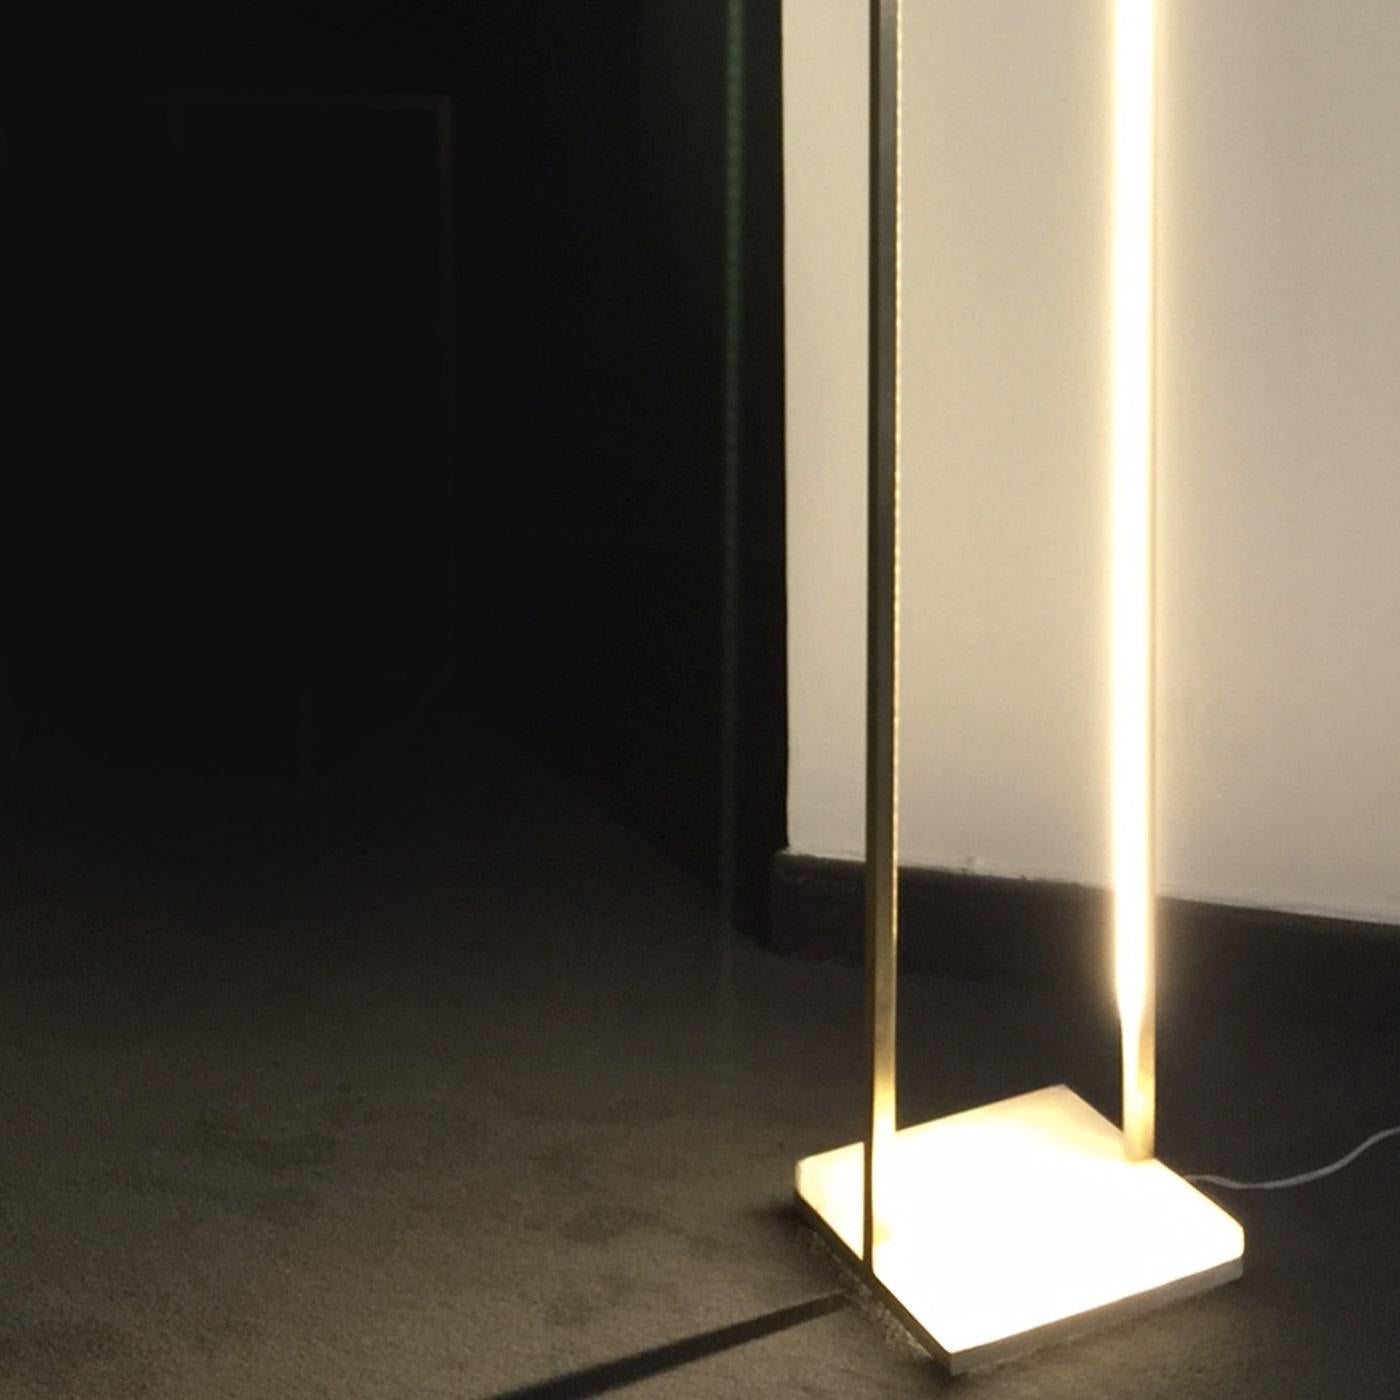 This exquisite lamp features a structure in brass that creates an elongated rectangular shape that will give a touch of modern sophistication to any decor. The LED lights, which run throughout the structure and can be dimmed, will create unique